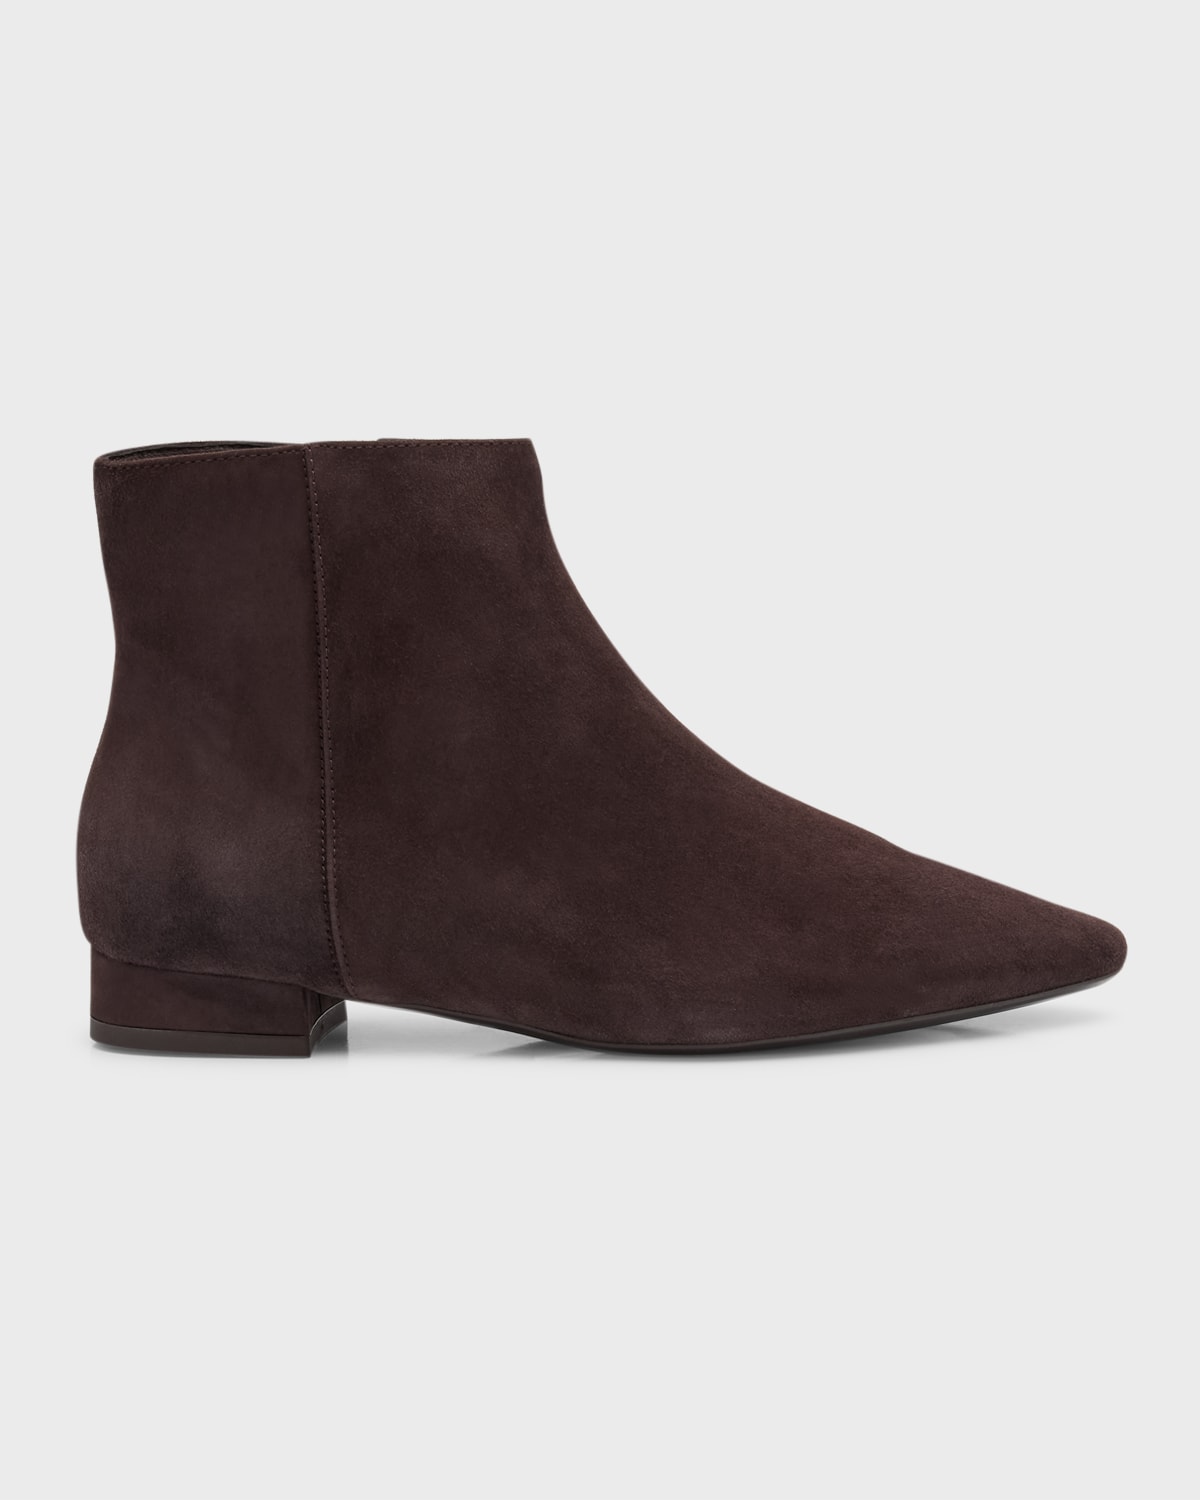 Prisilla Suede Ankle Booties